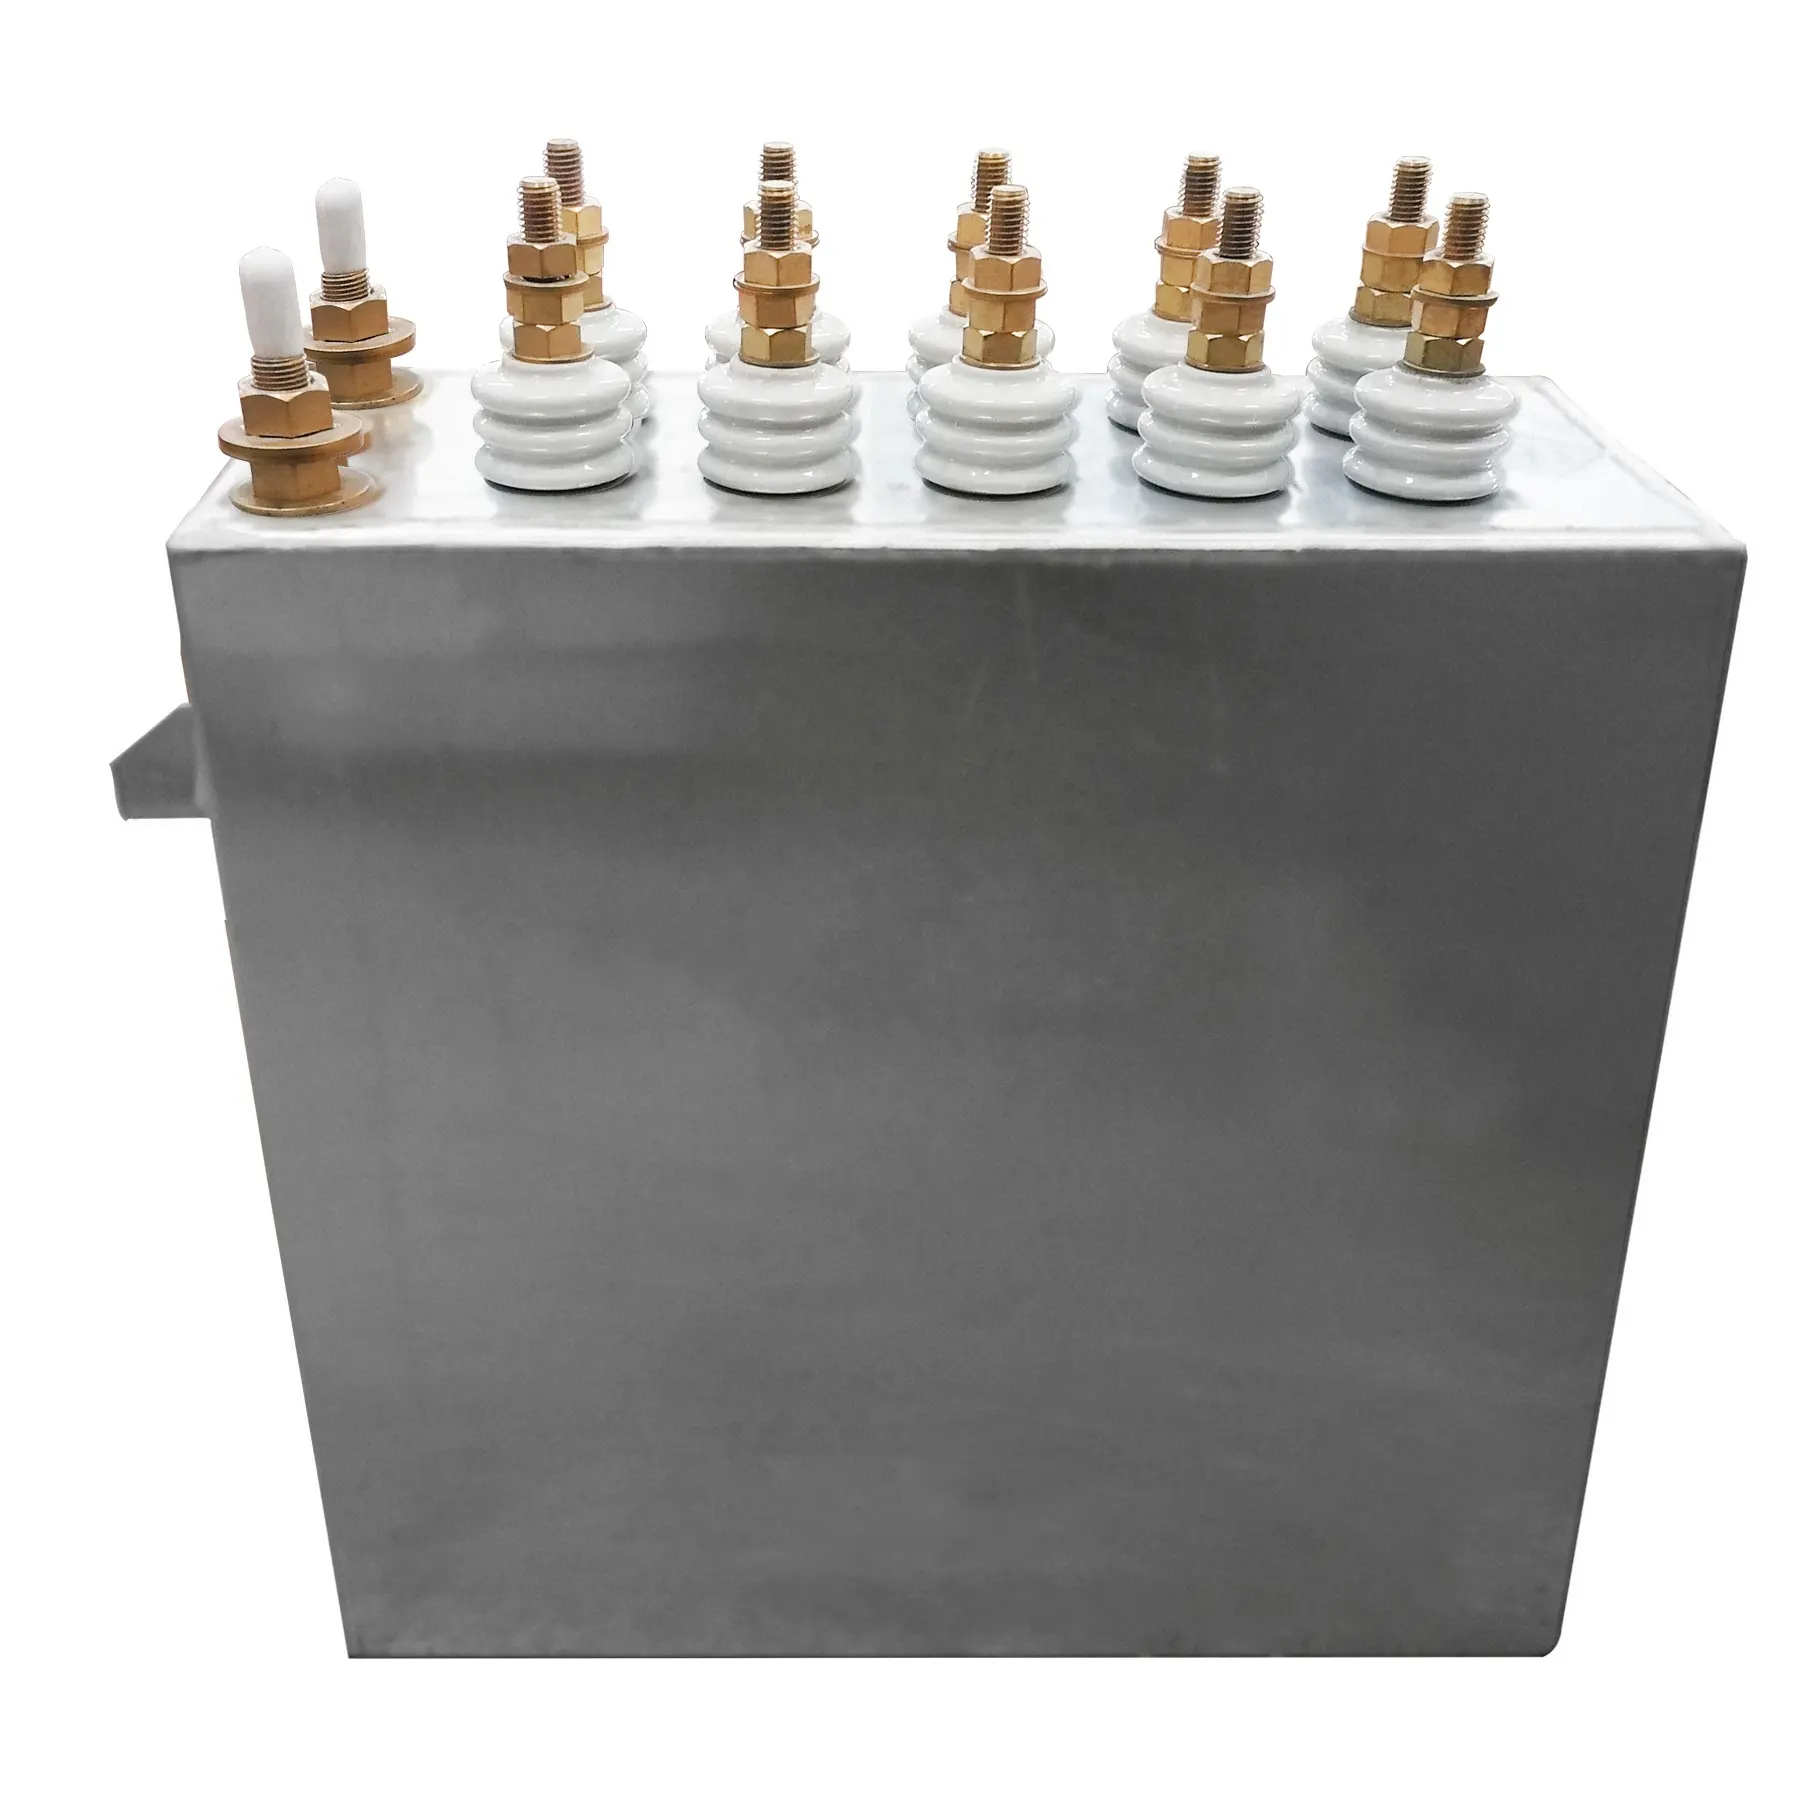 2000 kvar Water cooled power capacitors designed for use on induction furnaces and heaters RFM0.75-2000-1S